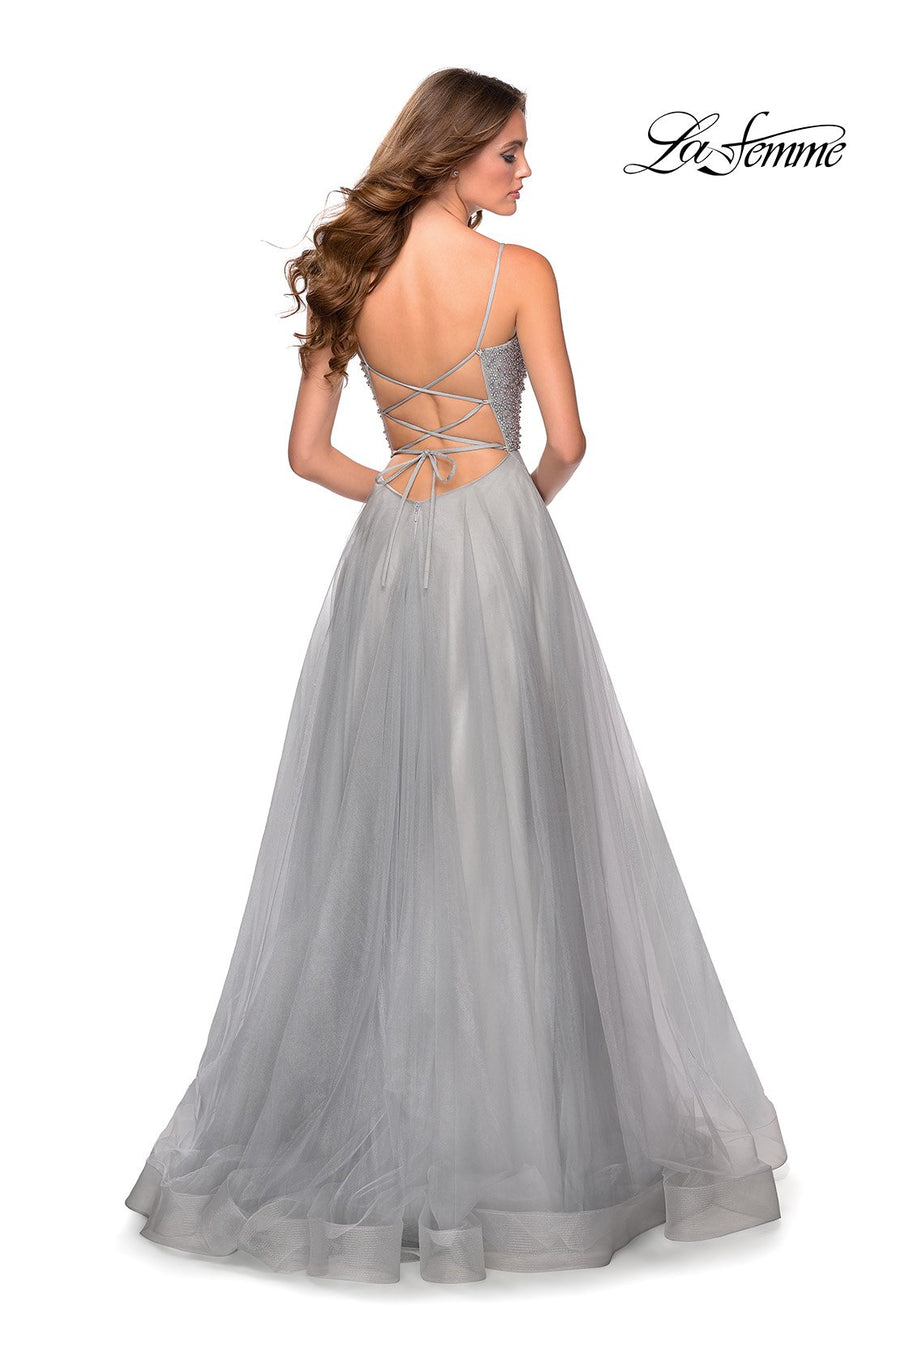 La Femme 28530 prom dress images.  La Femme 28530 is available in these colors: Mauve, Nude, Pale Yellow, Silver.